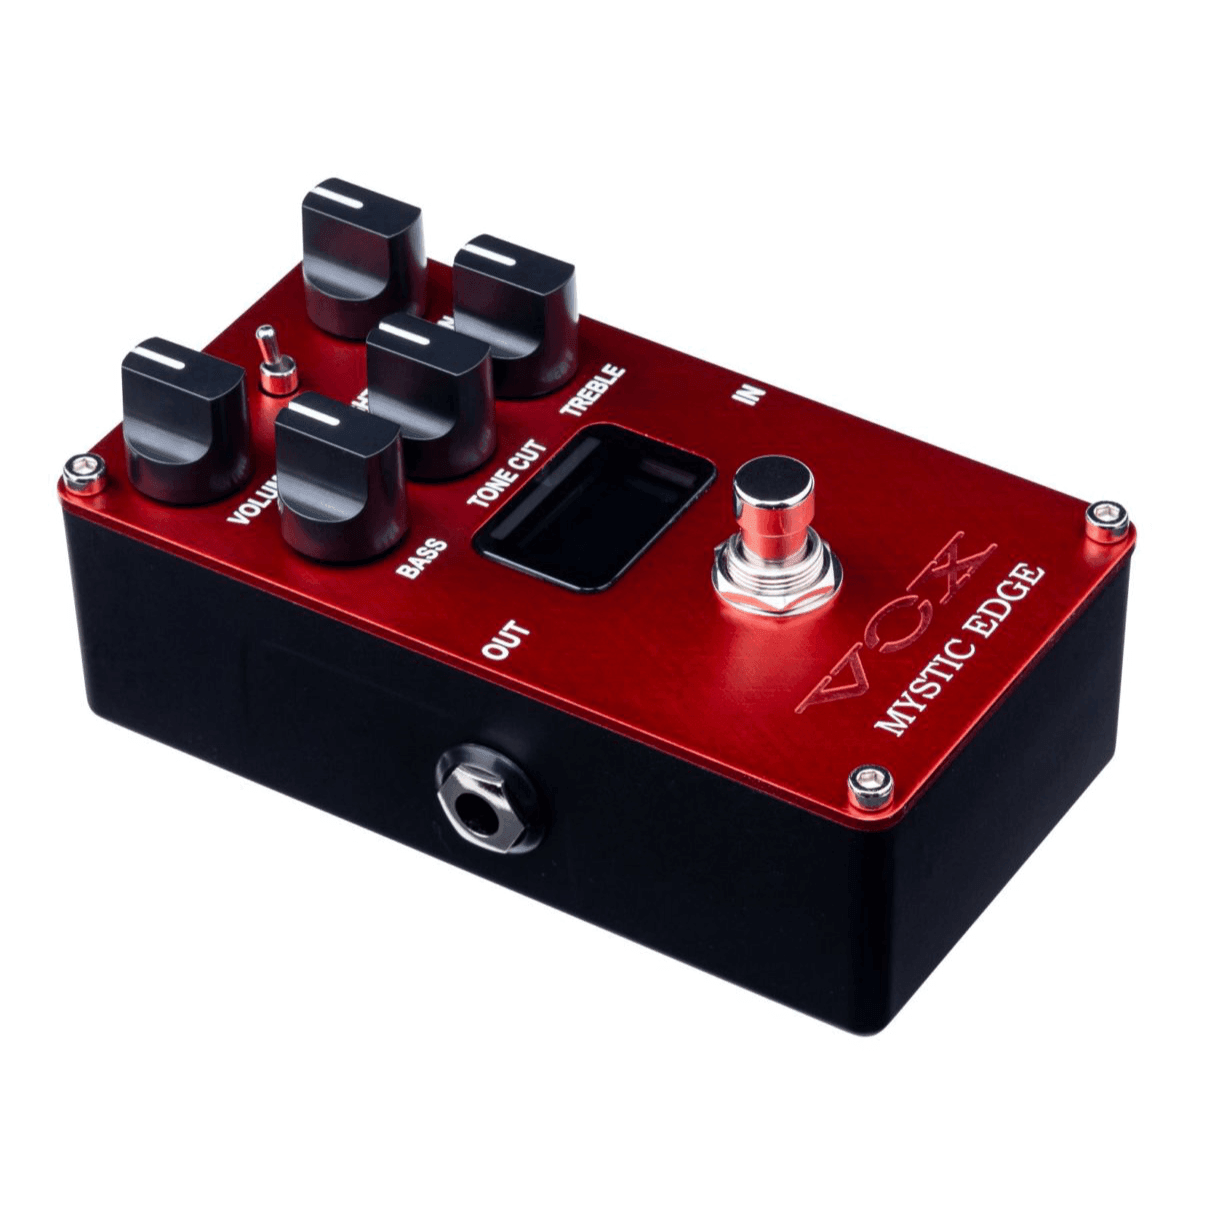 Vox - Mystic Edge Valvenergy Tube Amp Pedal - Guitar - Effects Pedals by VOX at Muso's Stuff